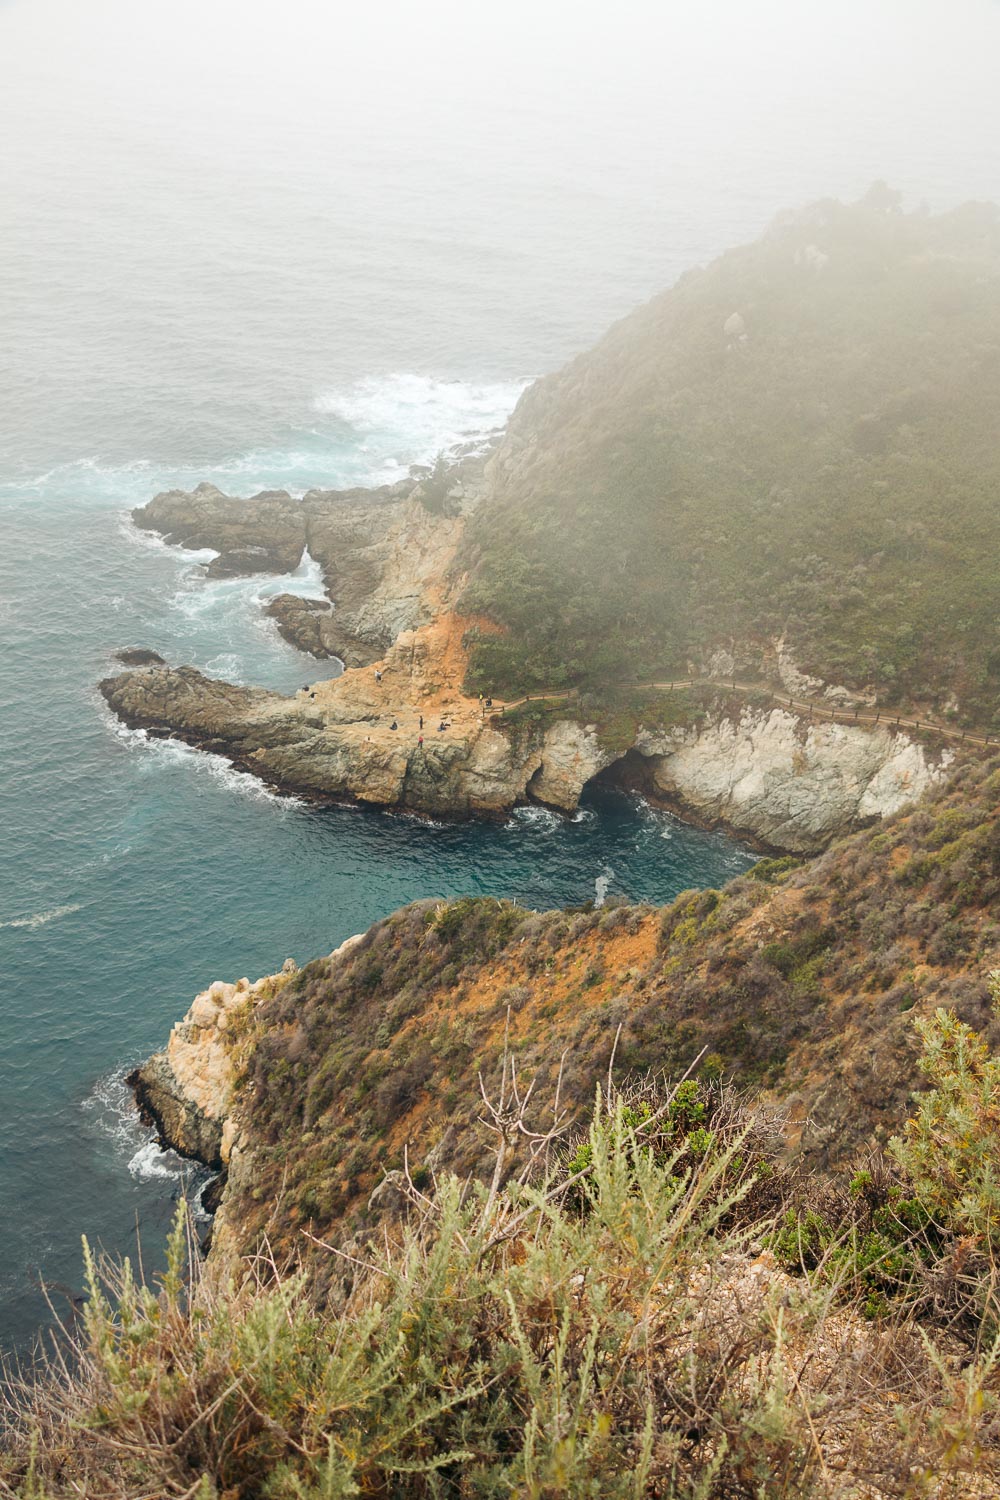 Big Sur Drive - Places to Visit and Things to Do - Roads and Destinations